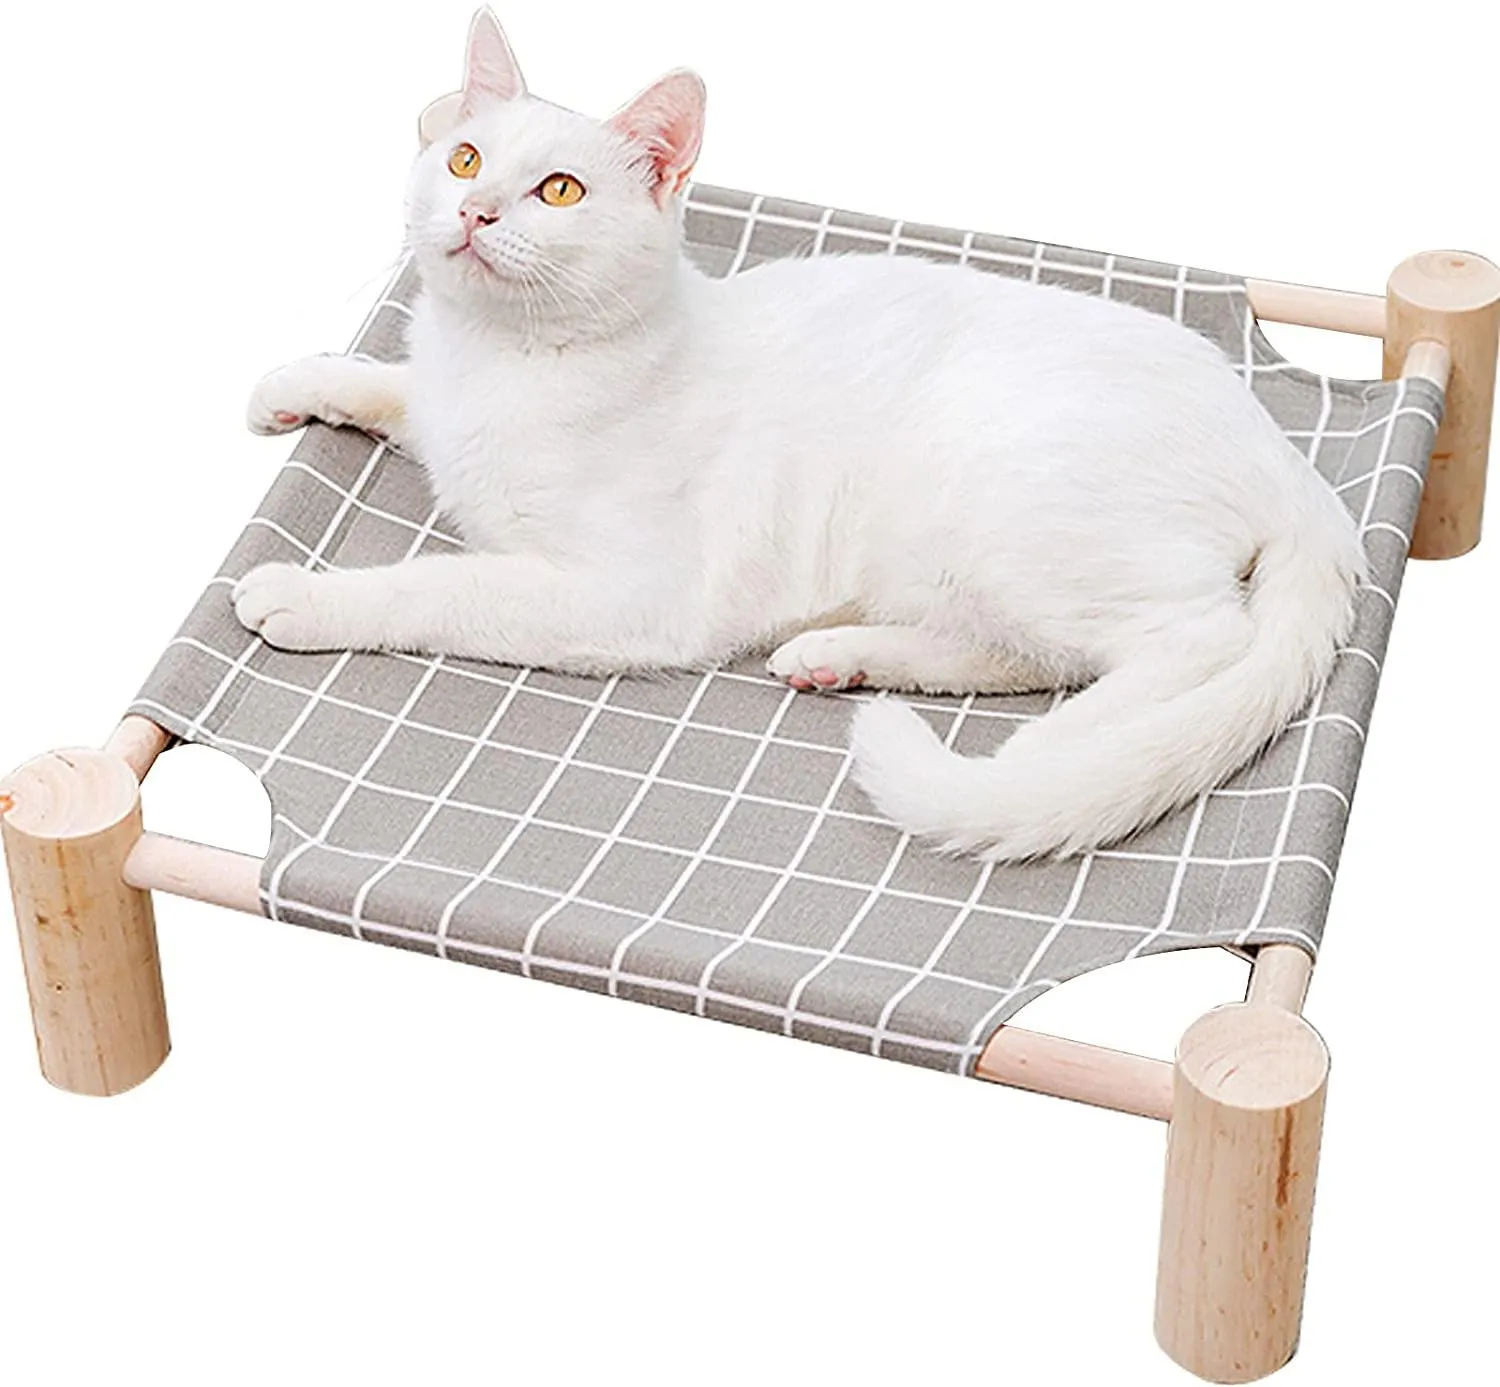 Mats Cat and Dog Hammock Bed, Wooden cat Hammock Elevated Cooling Bed, Detachable Portable Indoor Outdoor pet Bed, Suitable for Cats